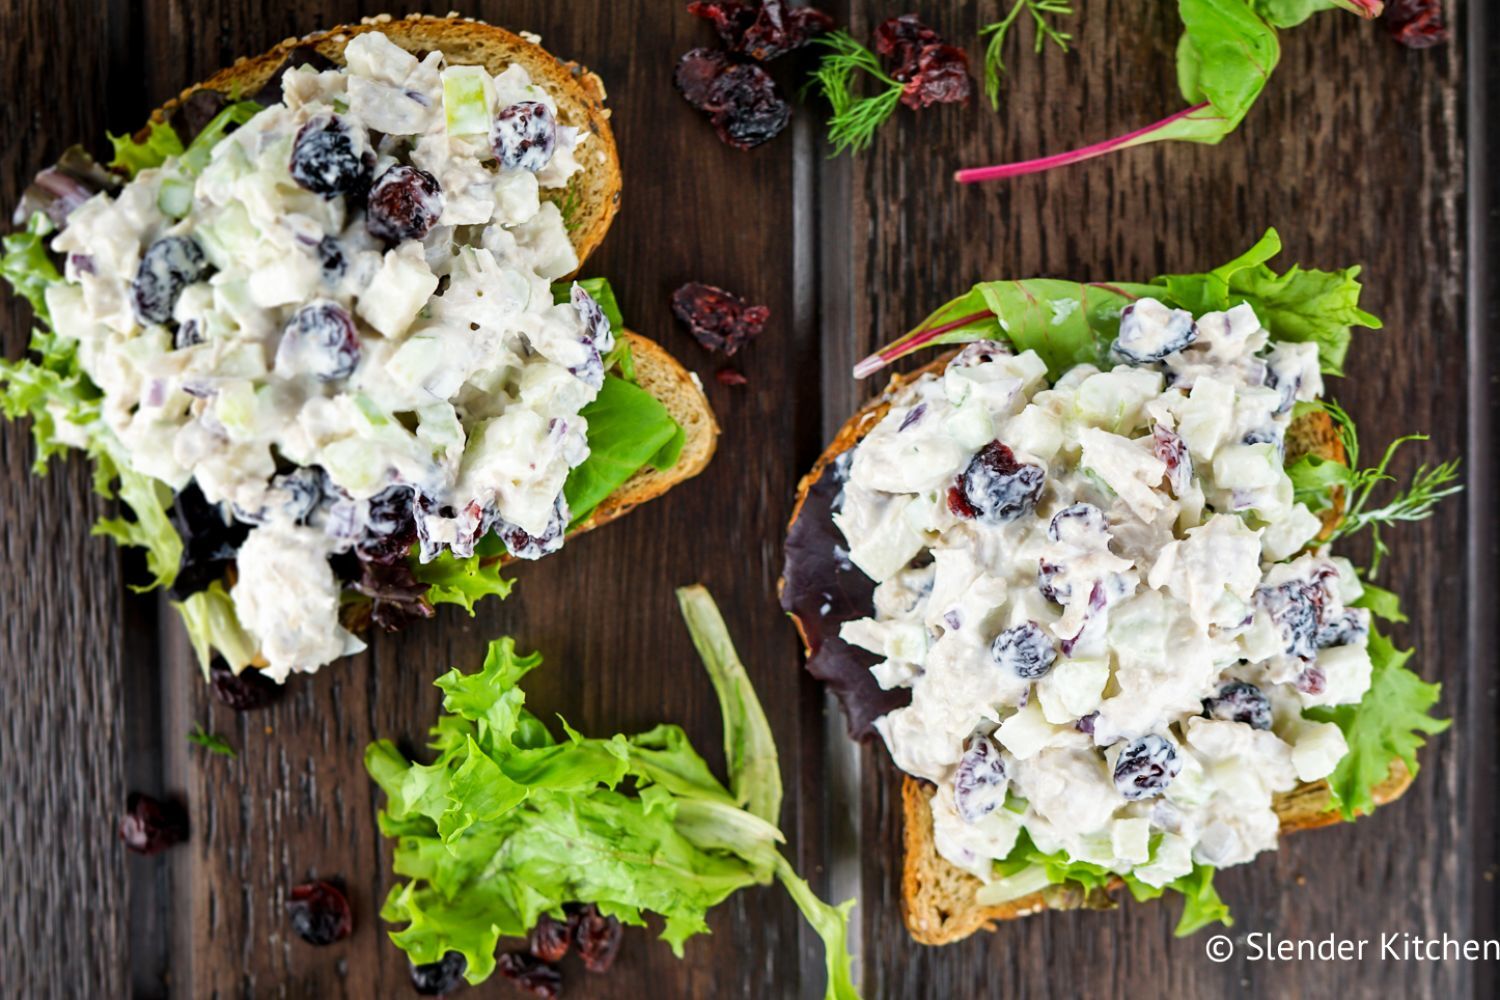 Cranberry Tuna salad with apples and celery served on toast with lettuce.